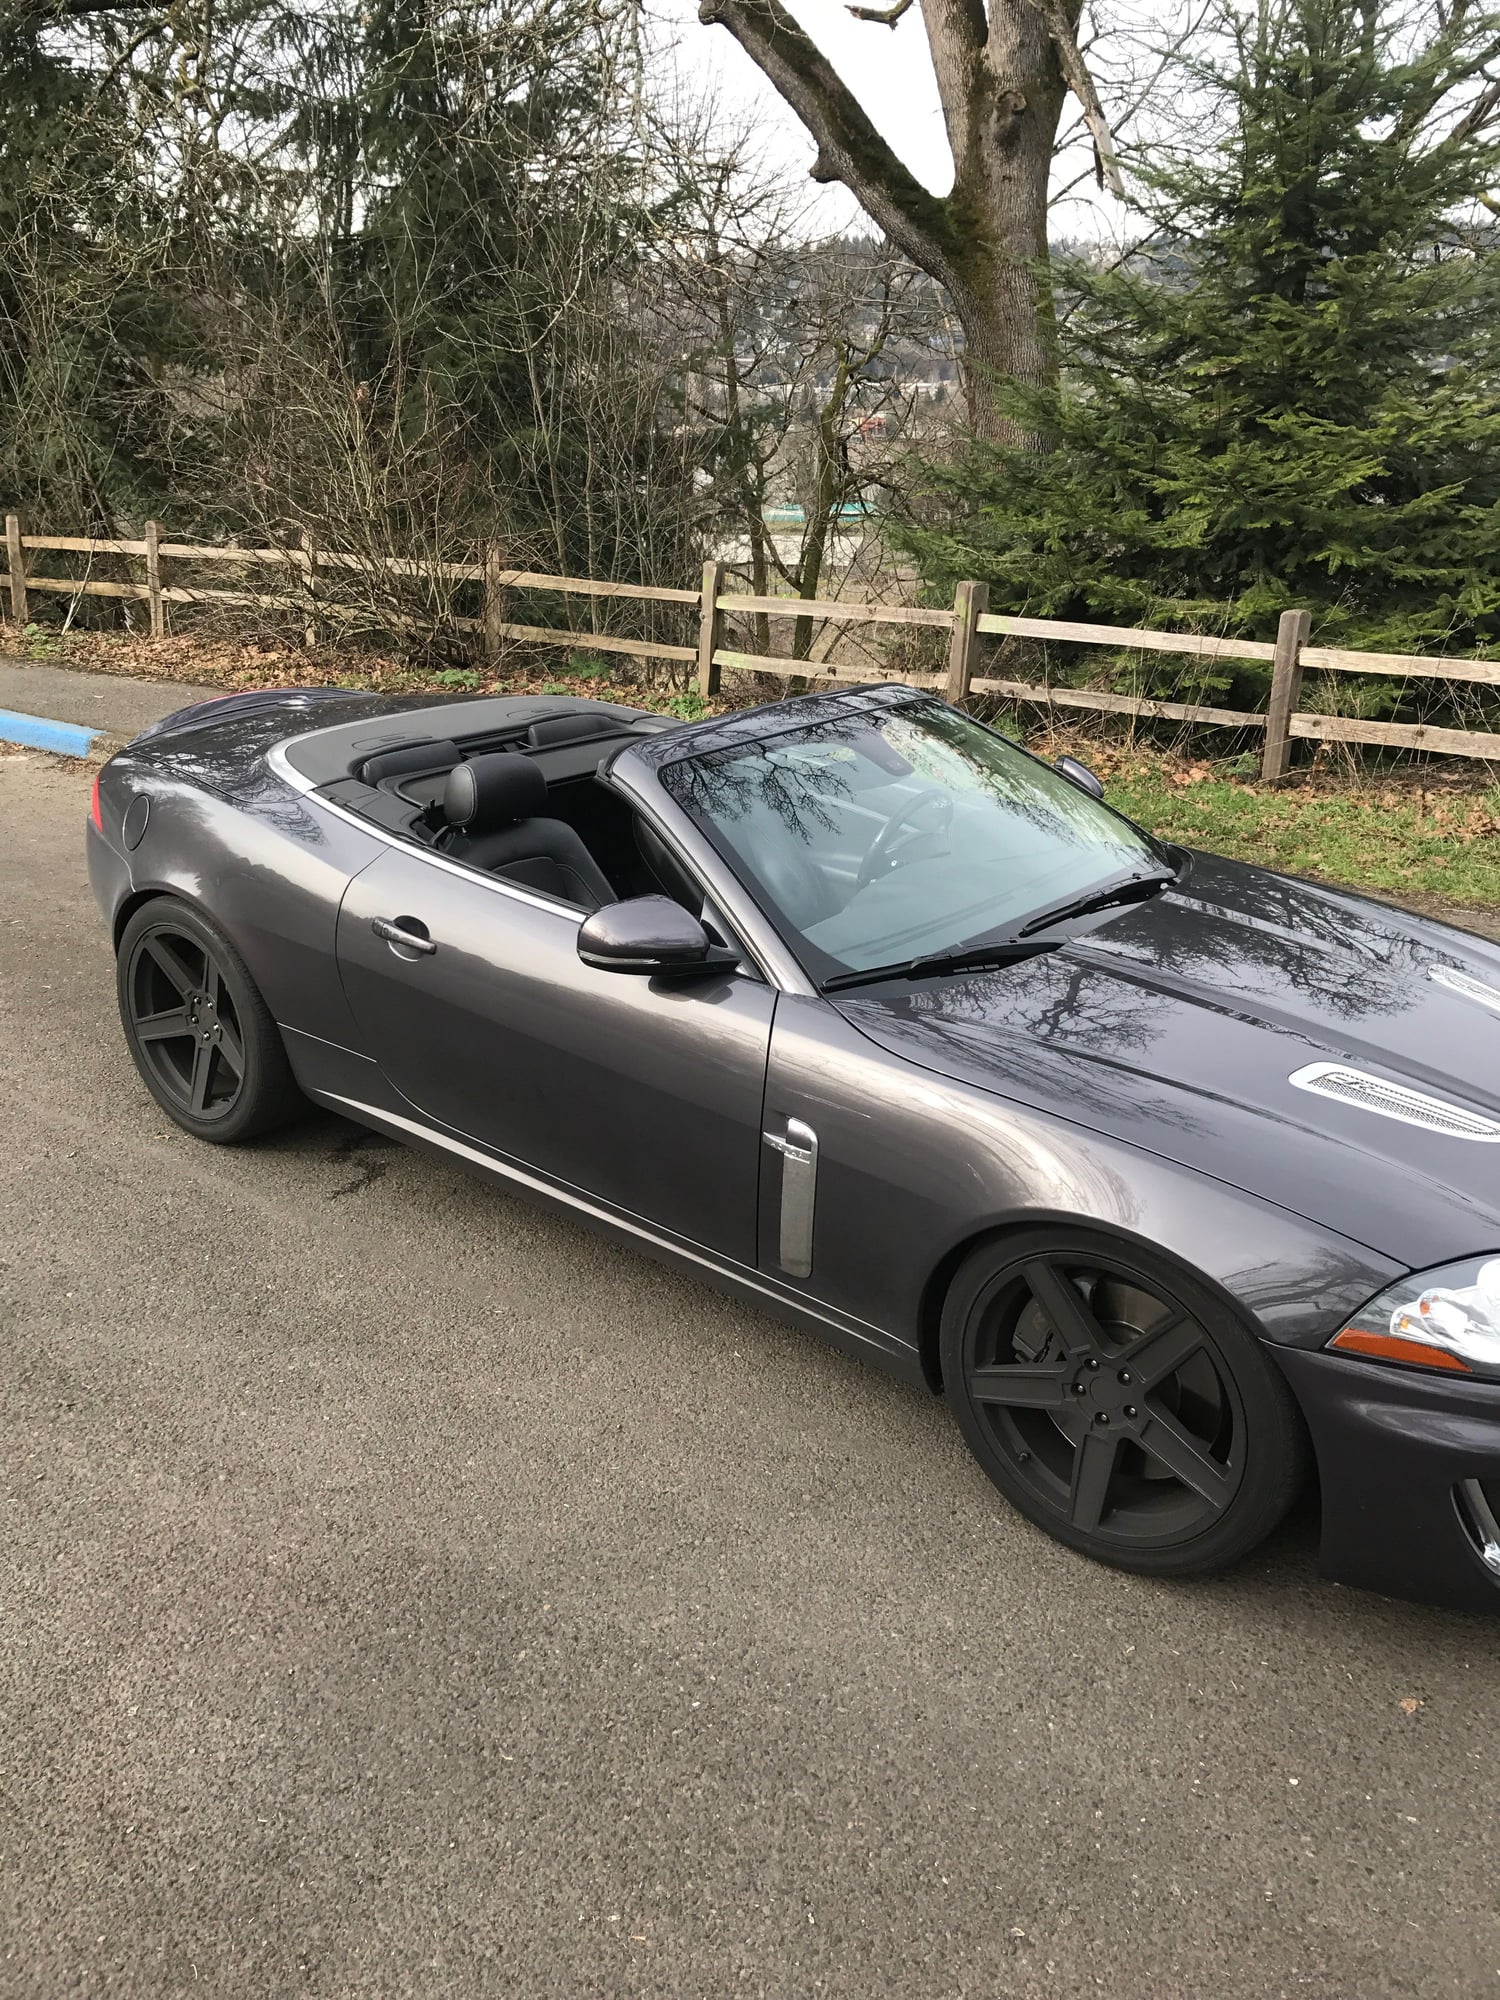 2010 Jaguar XKR - 2010 XKR Convertible - Used - VIN SAJWA4EC8AMB38627 - 108,000 Miles - 8 cyl - 2WD - Automatic - Convertible - Gray - Portland, OR 97202, United States